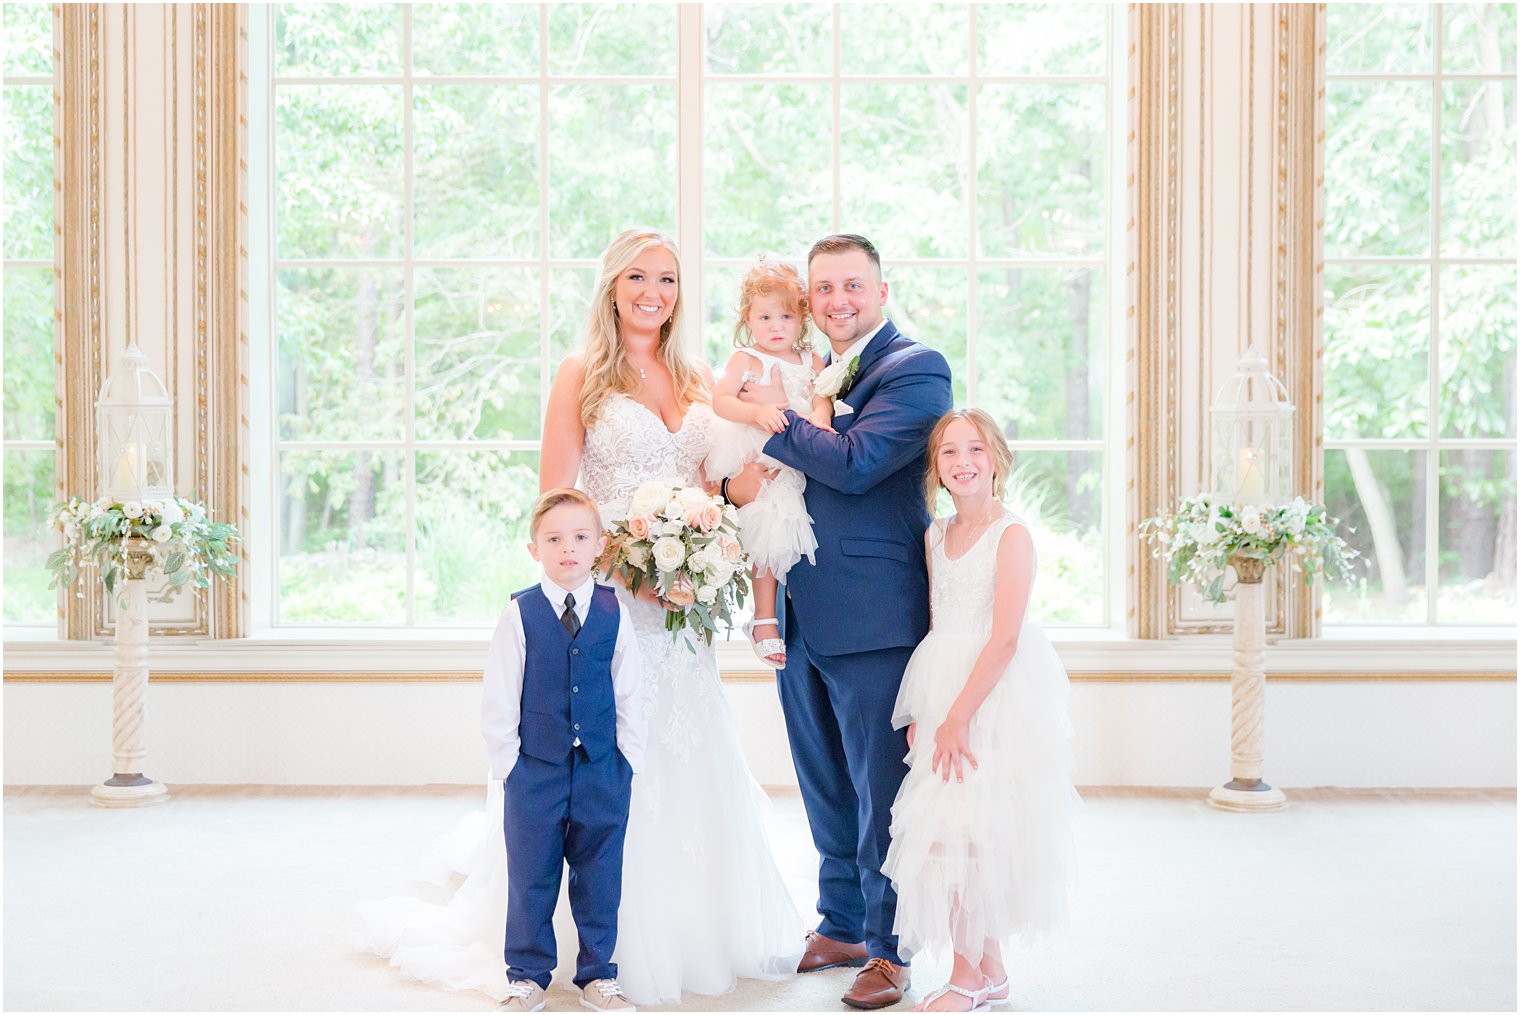 newlyweds pose with two flower girls and ring bearer after wedding ceremony 